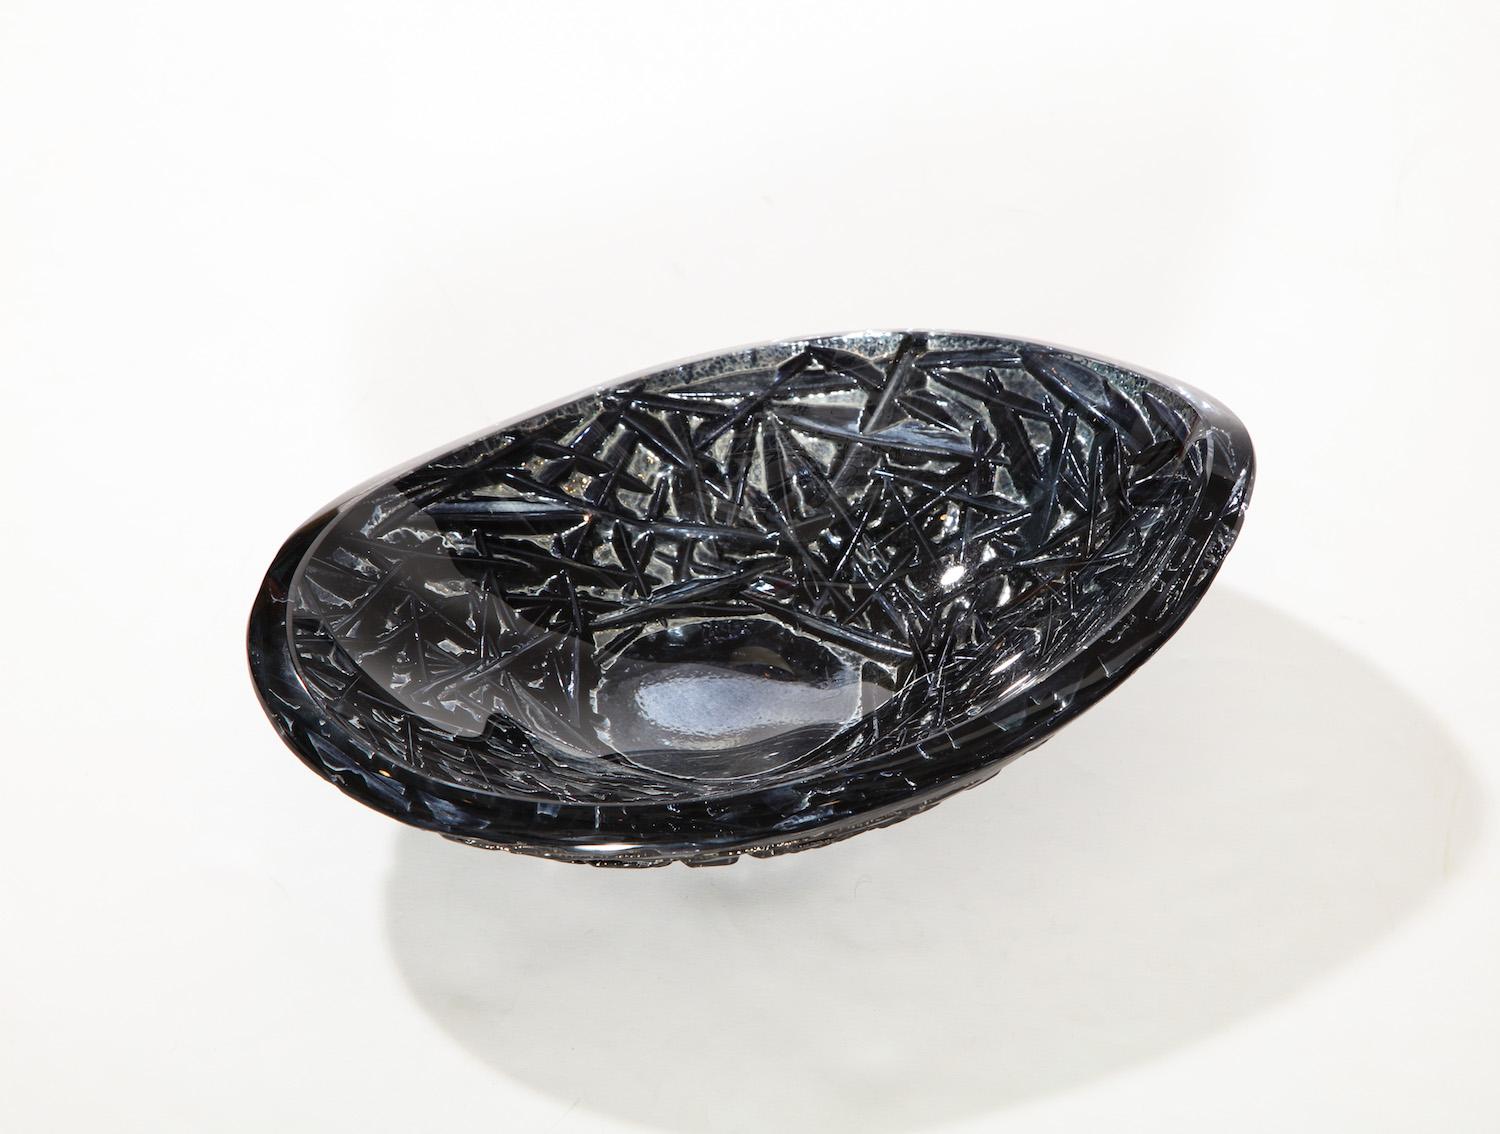 Italian Studio-Made Carved Glass Dish by Ghiró Studio, Small For Sale